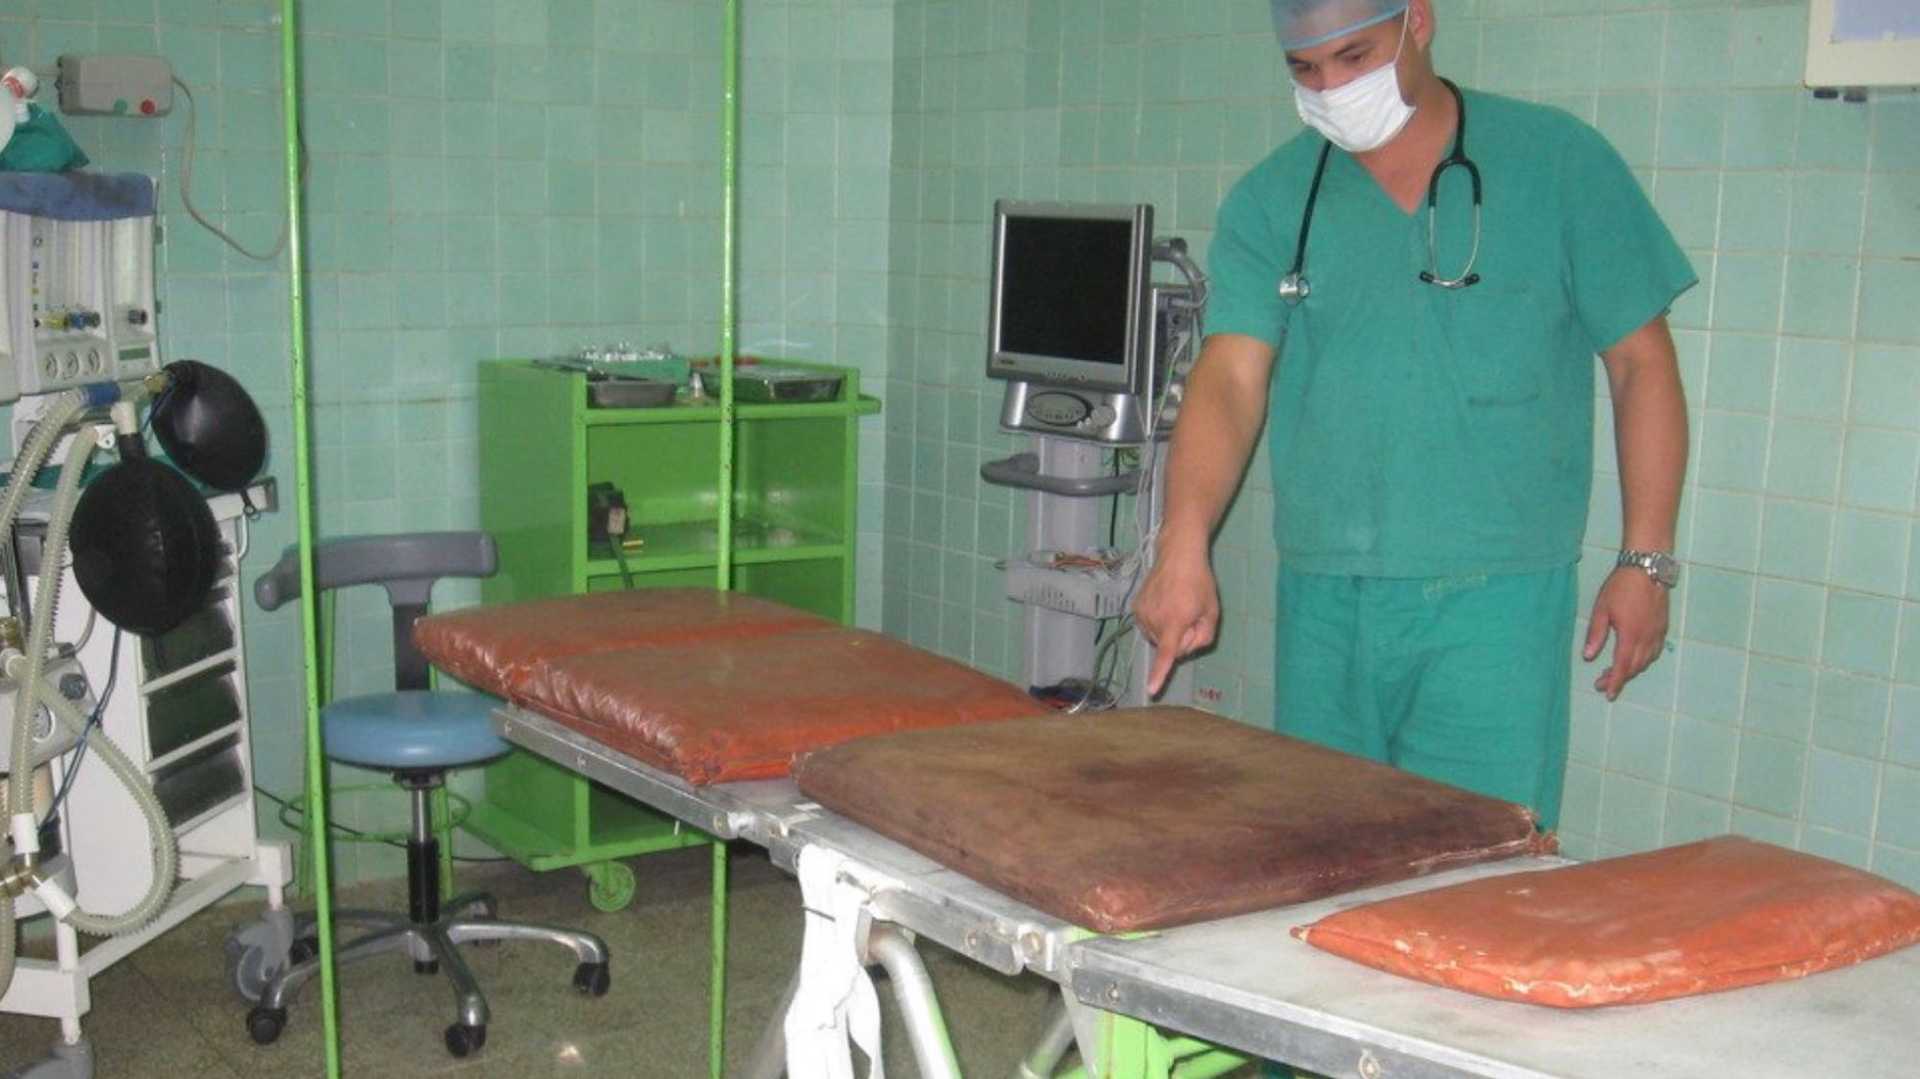 a doctor showing a disgusting mattress in a hospital in Cuba